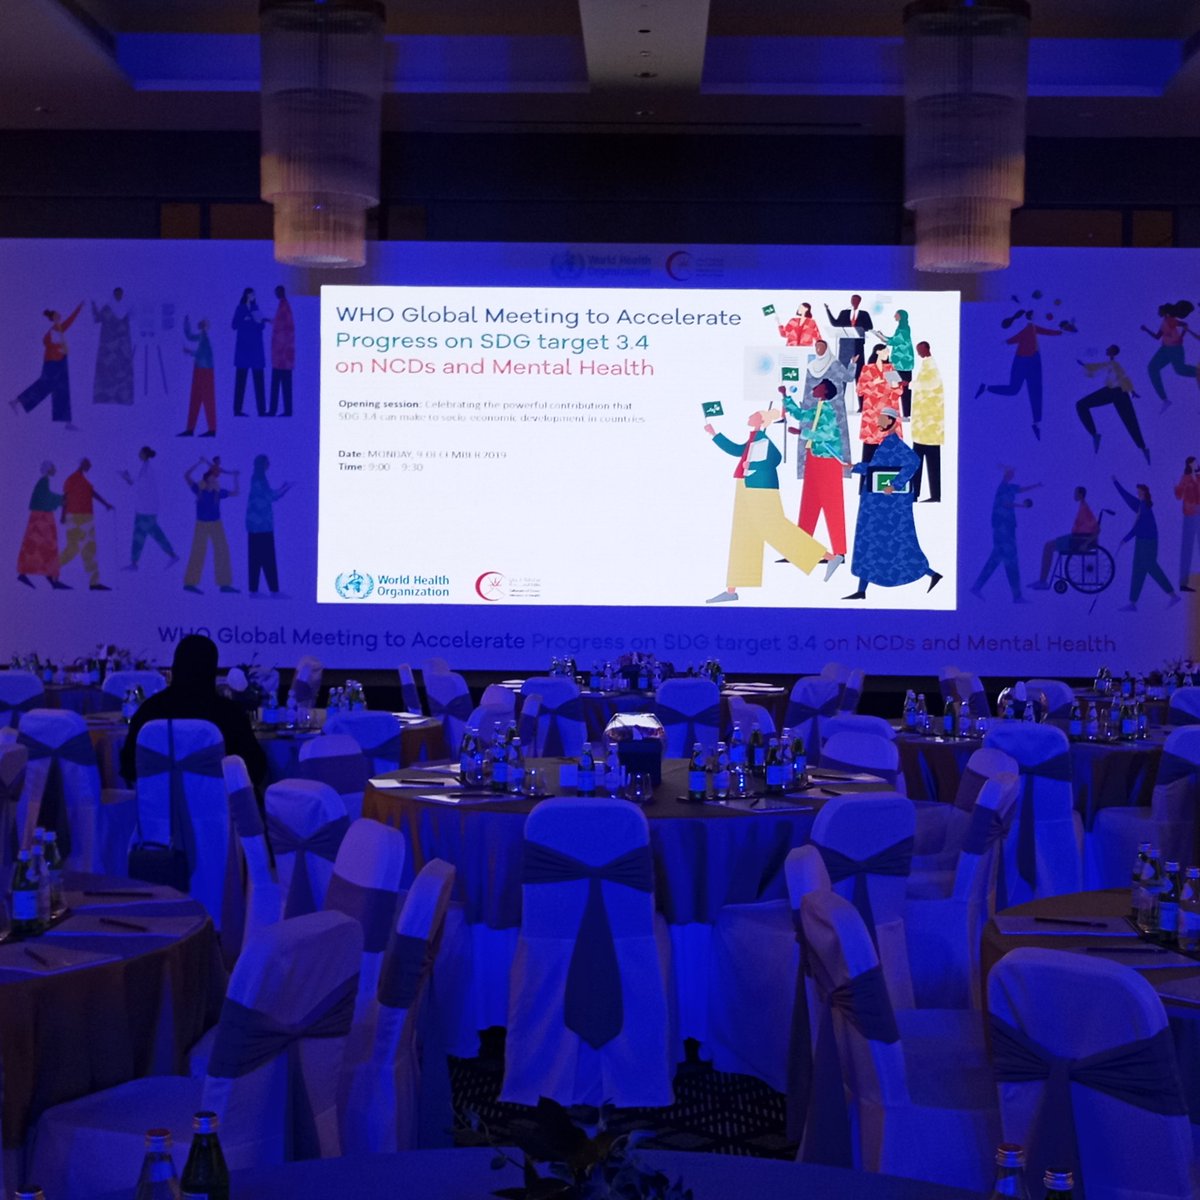 All is set and ready for the start of the WHO meeting to accelerate progress in NCDs globally in Muscat, Oman. Honoured to represent youth engagement in this meeting. #BeatNCDs @CSOs4UHC @UHC2030 #enoughNCDs @CBCHSORG @CameroonNCDA @ncdalliance @Recdefcameroon @OneYoungWorld